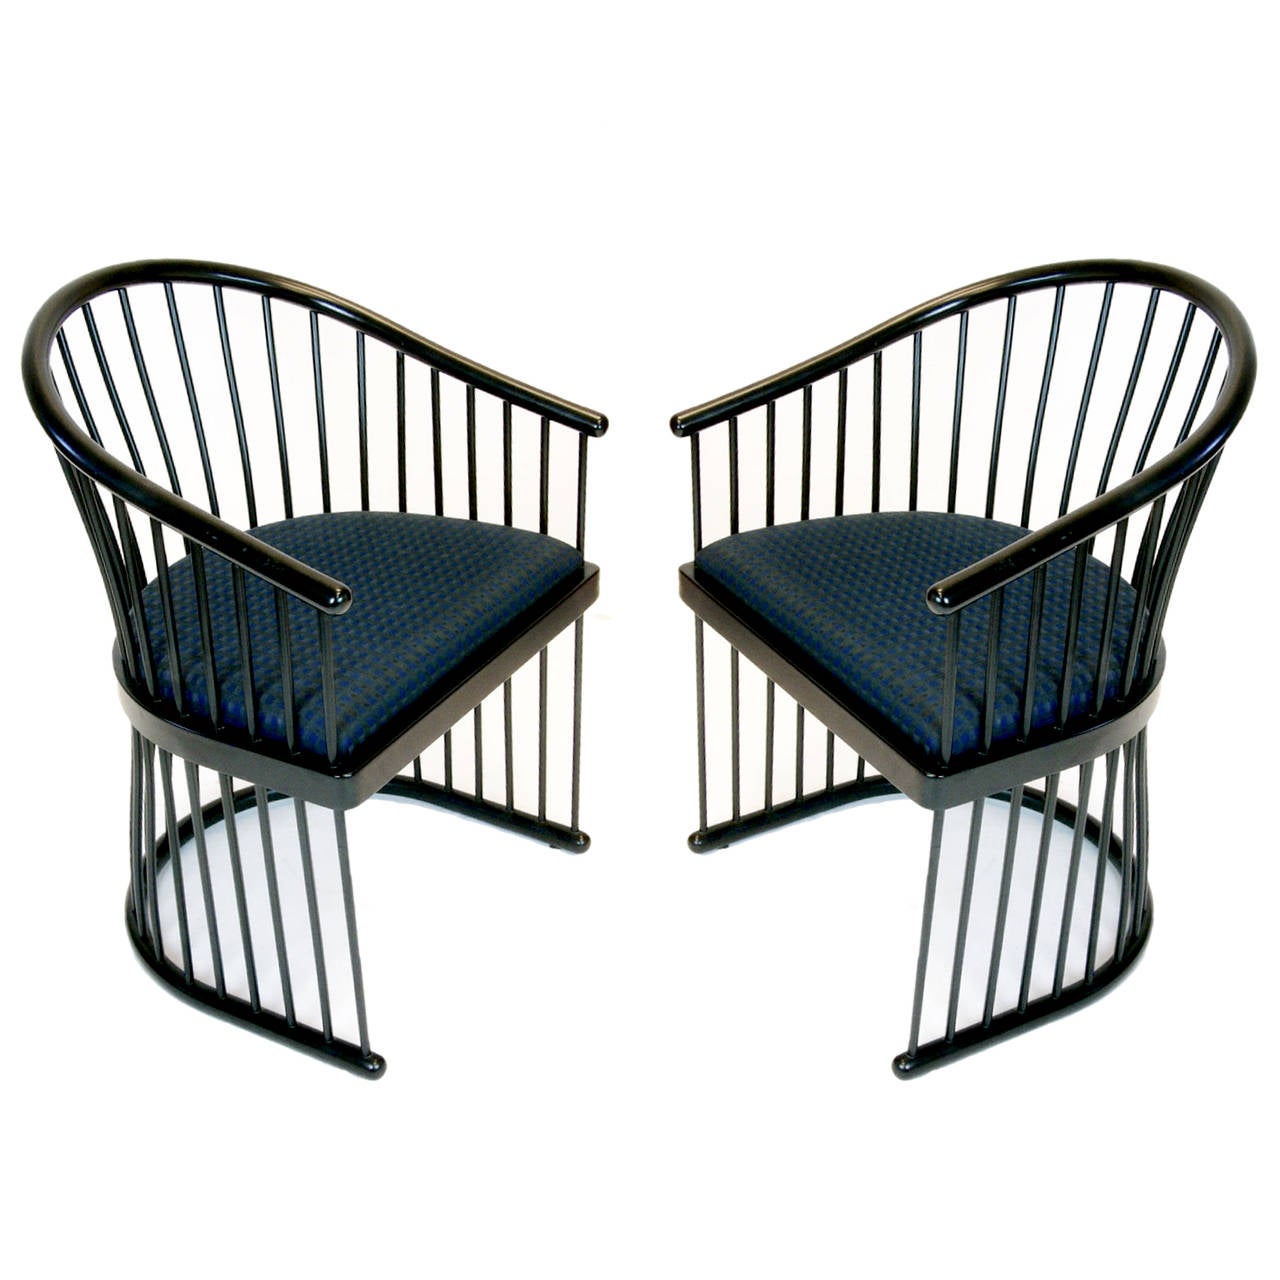 Pair of Jack Lenor Larsen black lacquered armchairs in a stunning cage style design.